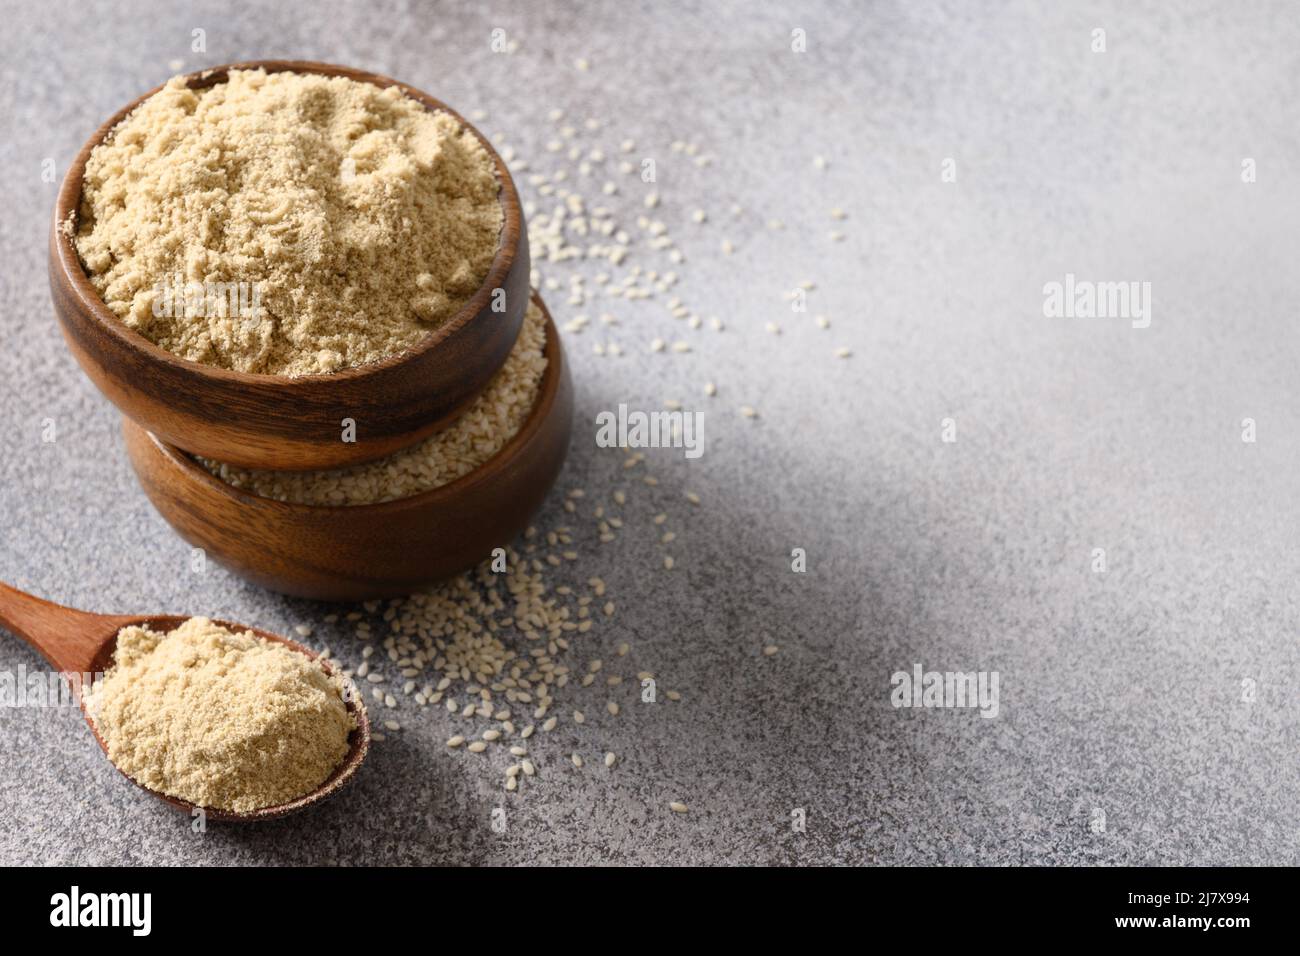 Sesame flour in wooden bowls and spoon on gray background for cooking gluten-free and low carbohydrate dessert. Good source of protein, minerals, natu Stock Photo